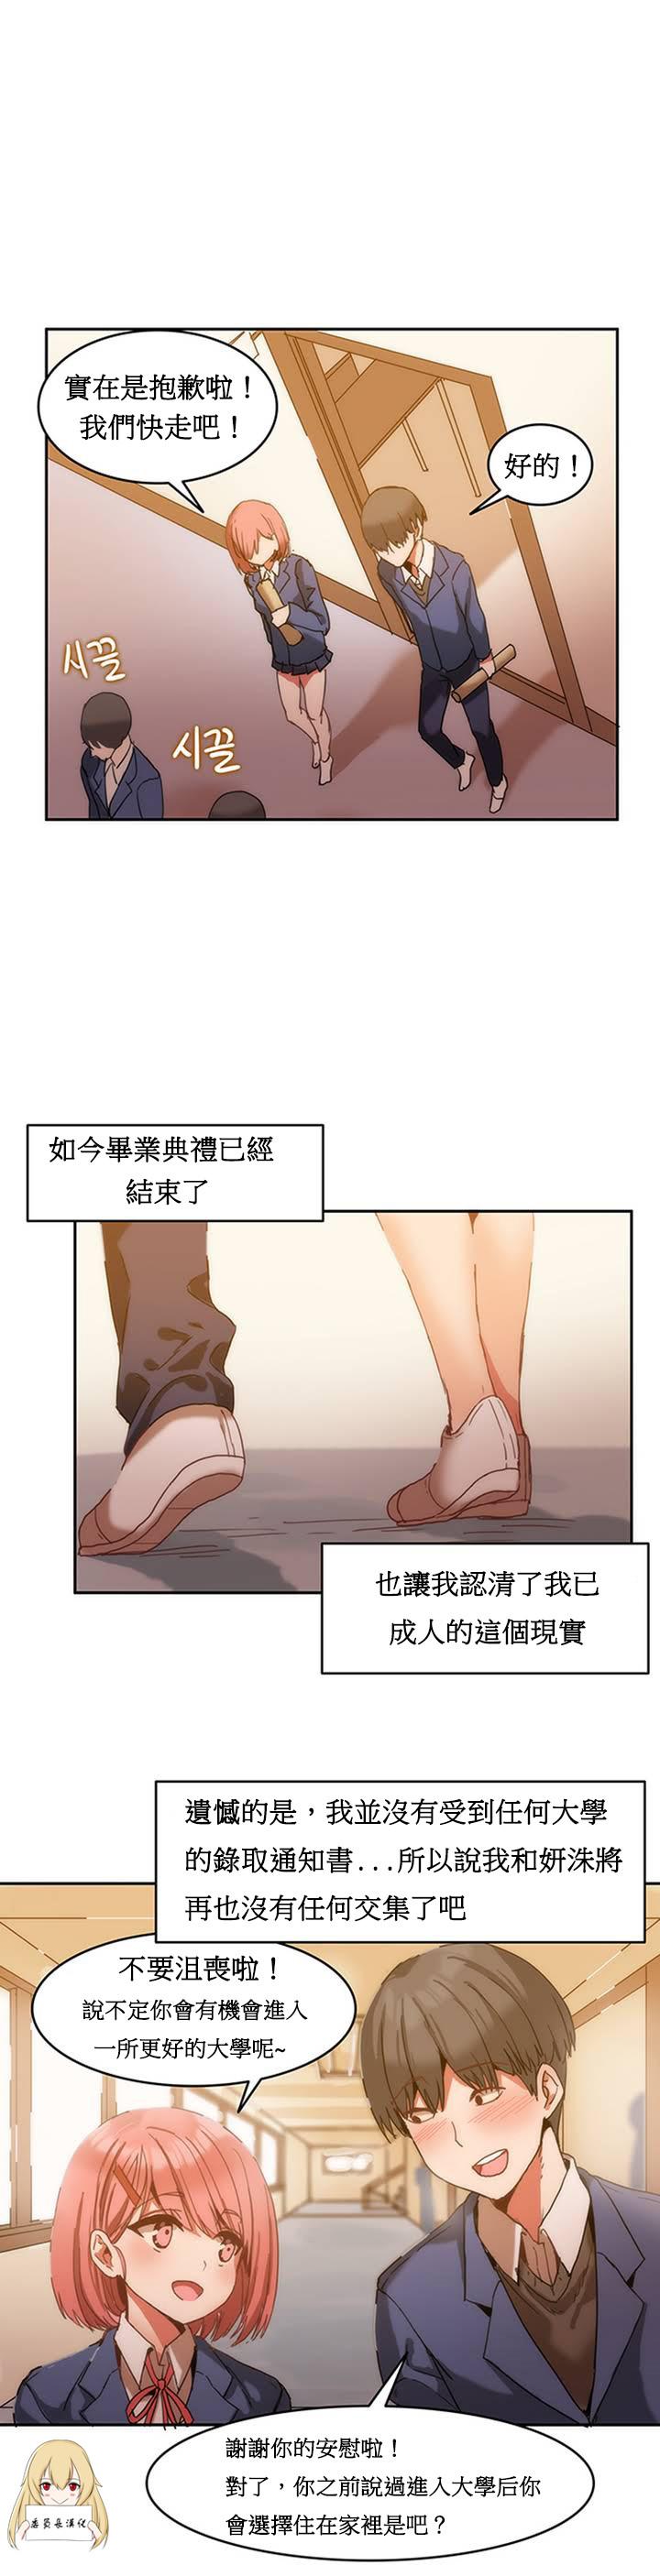 Cuckold Hahri's Lumpy Boardhouse Ch. 0~21【委員長個人漢化】（持續更新） Blowjob - Page 6